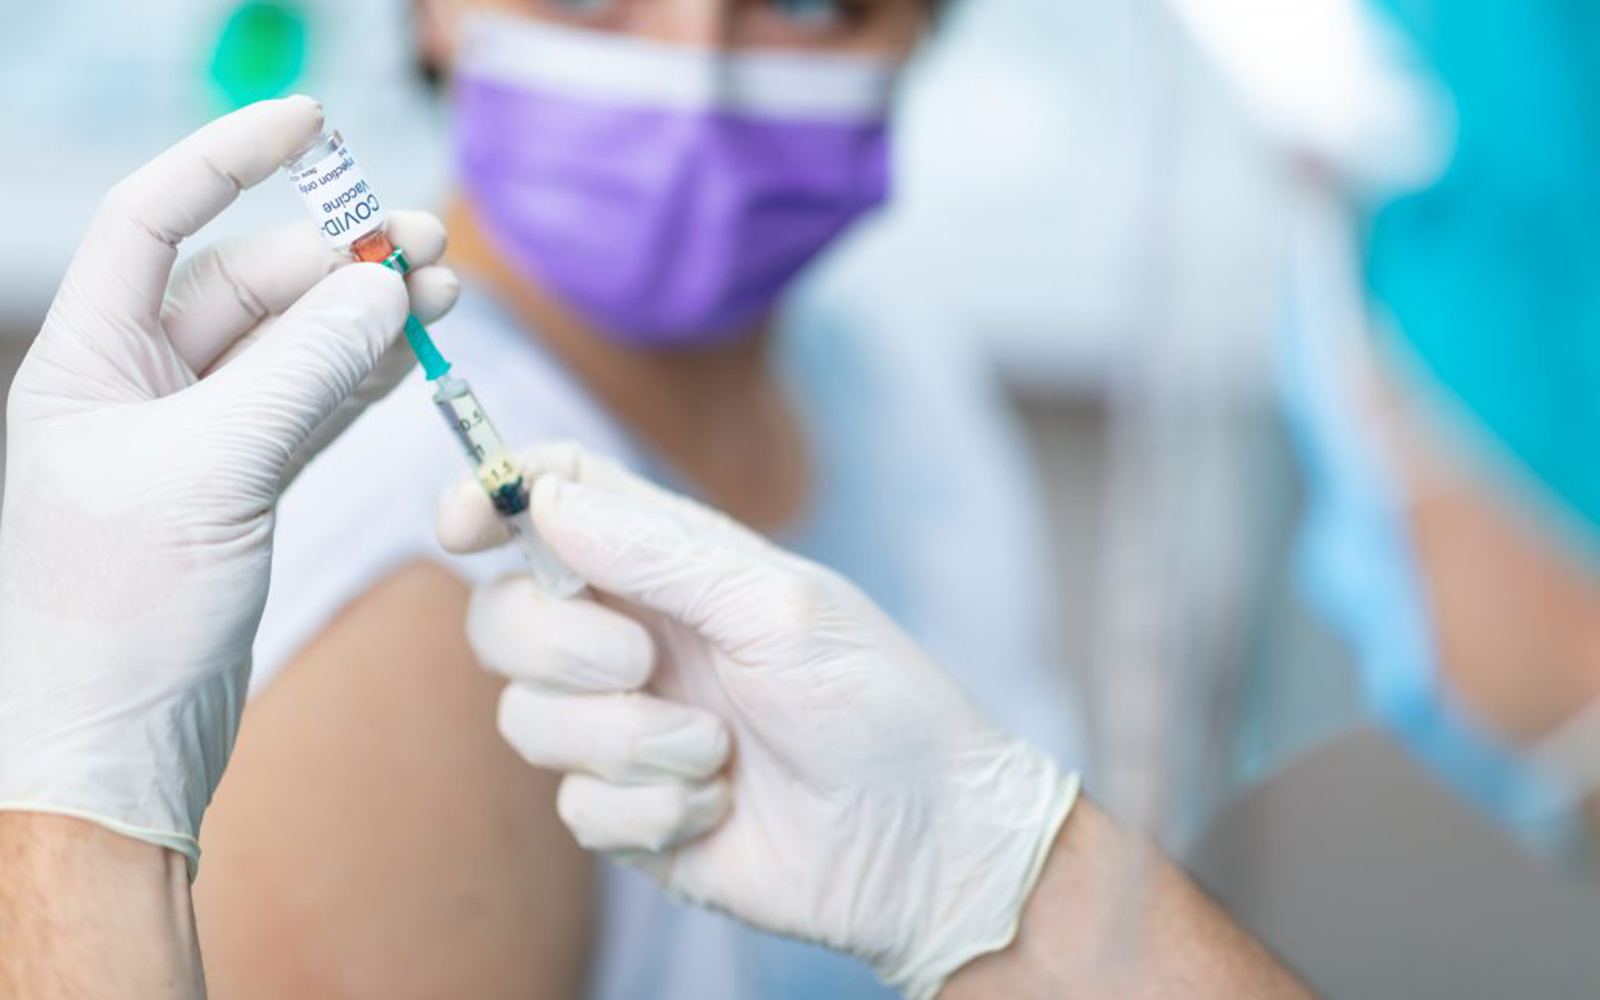 Getting COVID-19 vaccines from distribution centers into people's arms is a challenge that can be addressed by supply chain management practices. (Getty Images)